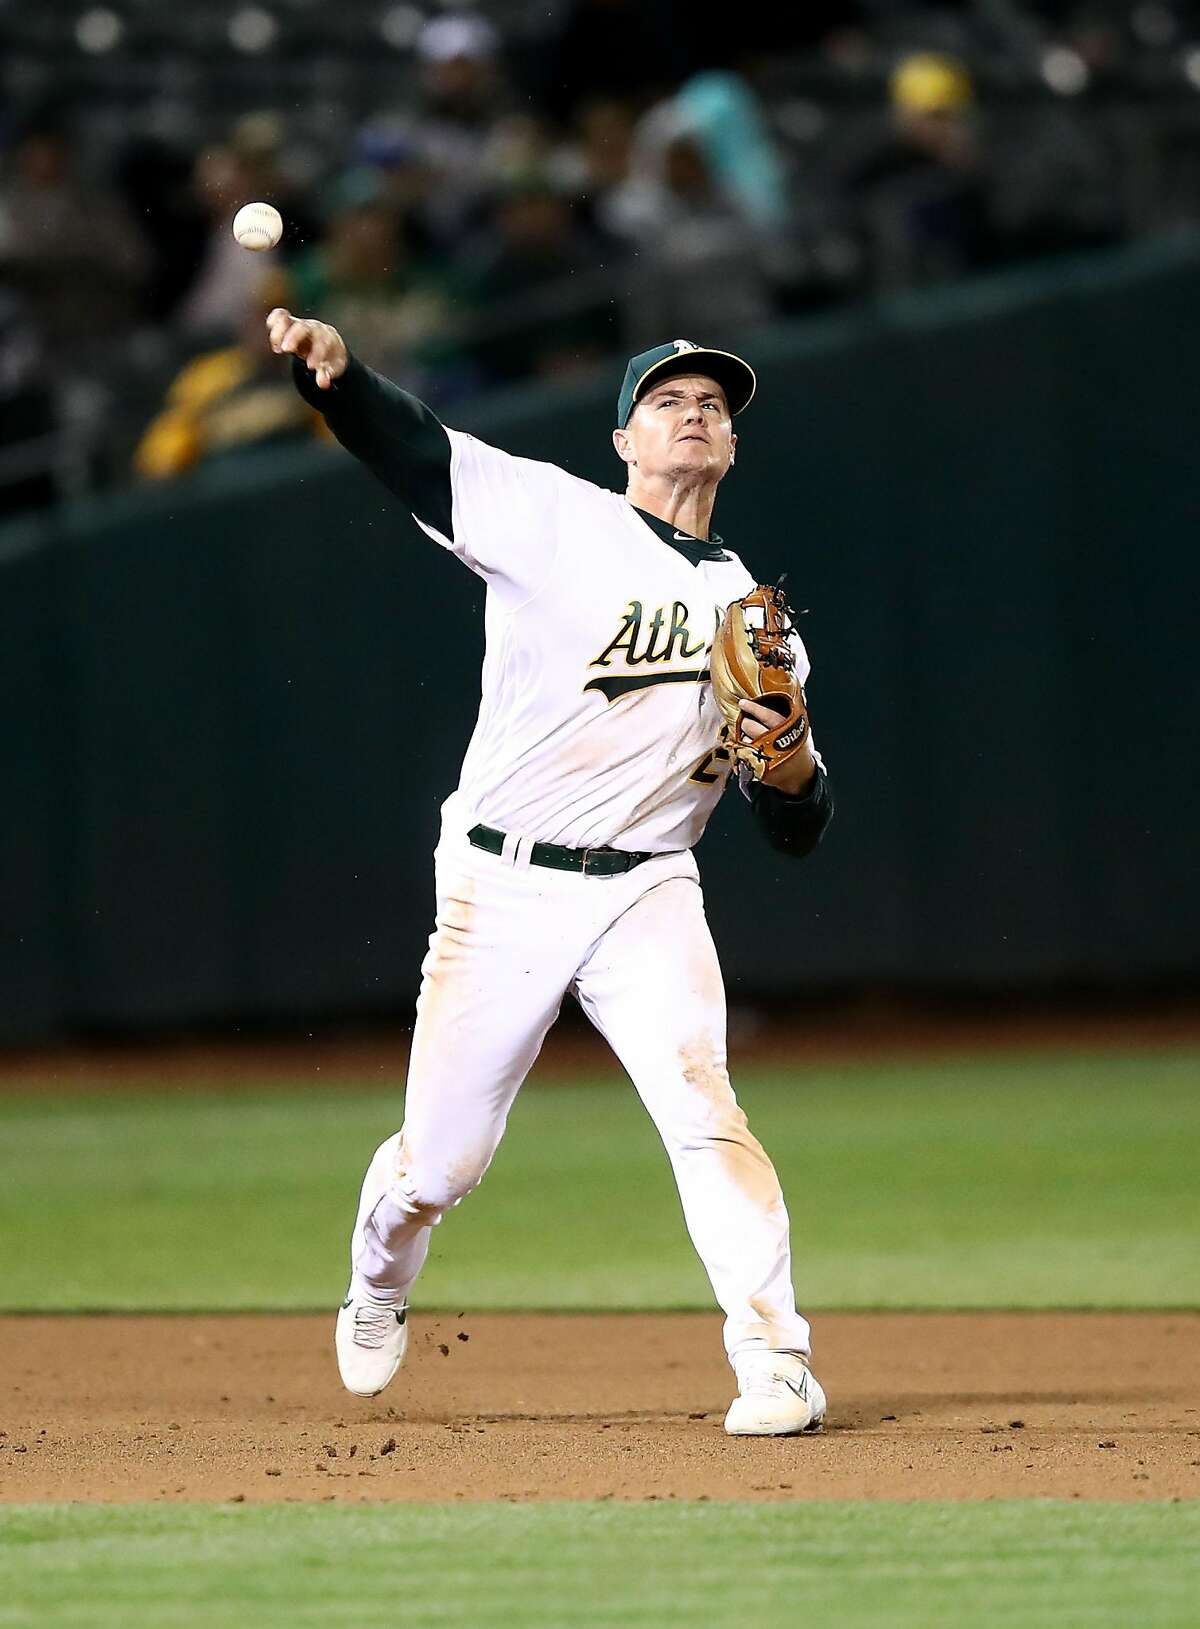 OAKLAND, CALIFORNIA - APRIL 03: Matt Chapman #26 of the Oakland Athletics throws out Eduardo Nunez #36 of the Boston Red Sox in the sixth inning at Oakland-Alameda County Coliseum on April 03, 2019 in Oakland, California. (Photo by Ezra Shaw/Getty Images)